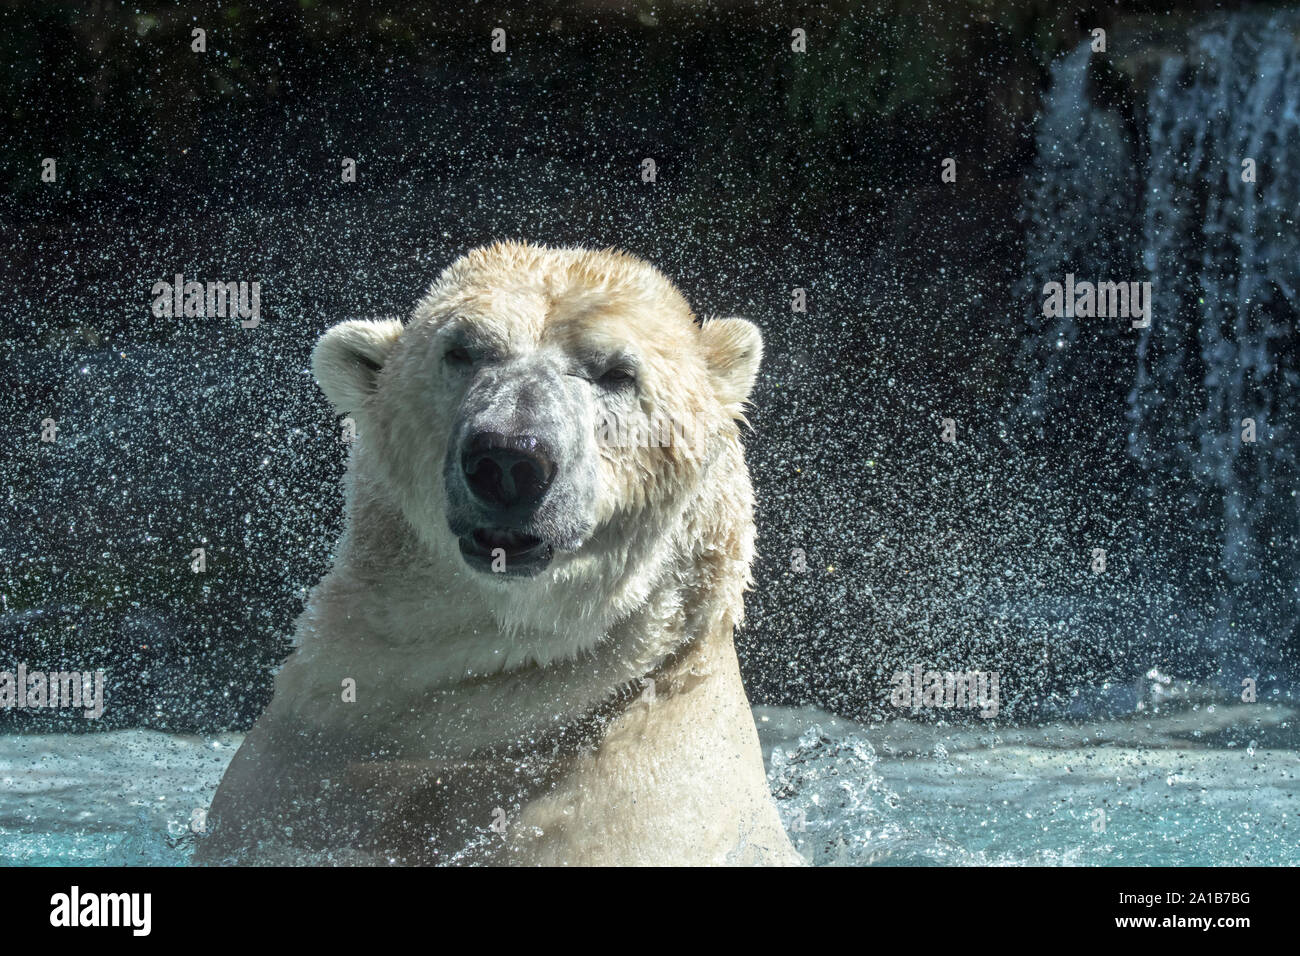 Polar bear (Ursus maritimus / Thalarctos maritimus) swimming and shaking head dry by shaking off water droplets in zoo Stock Photo